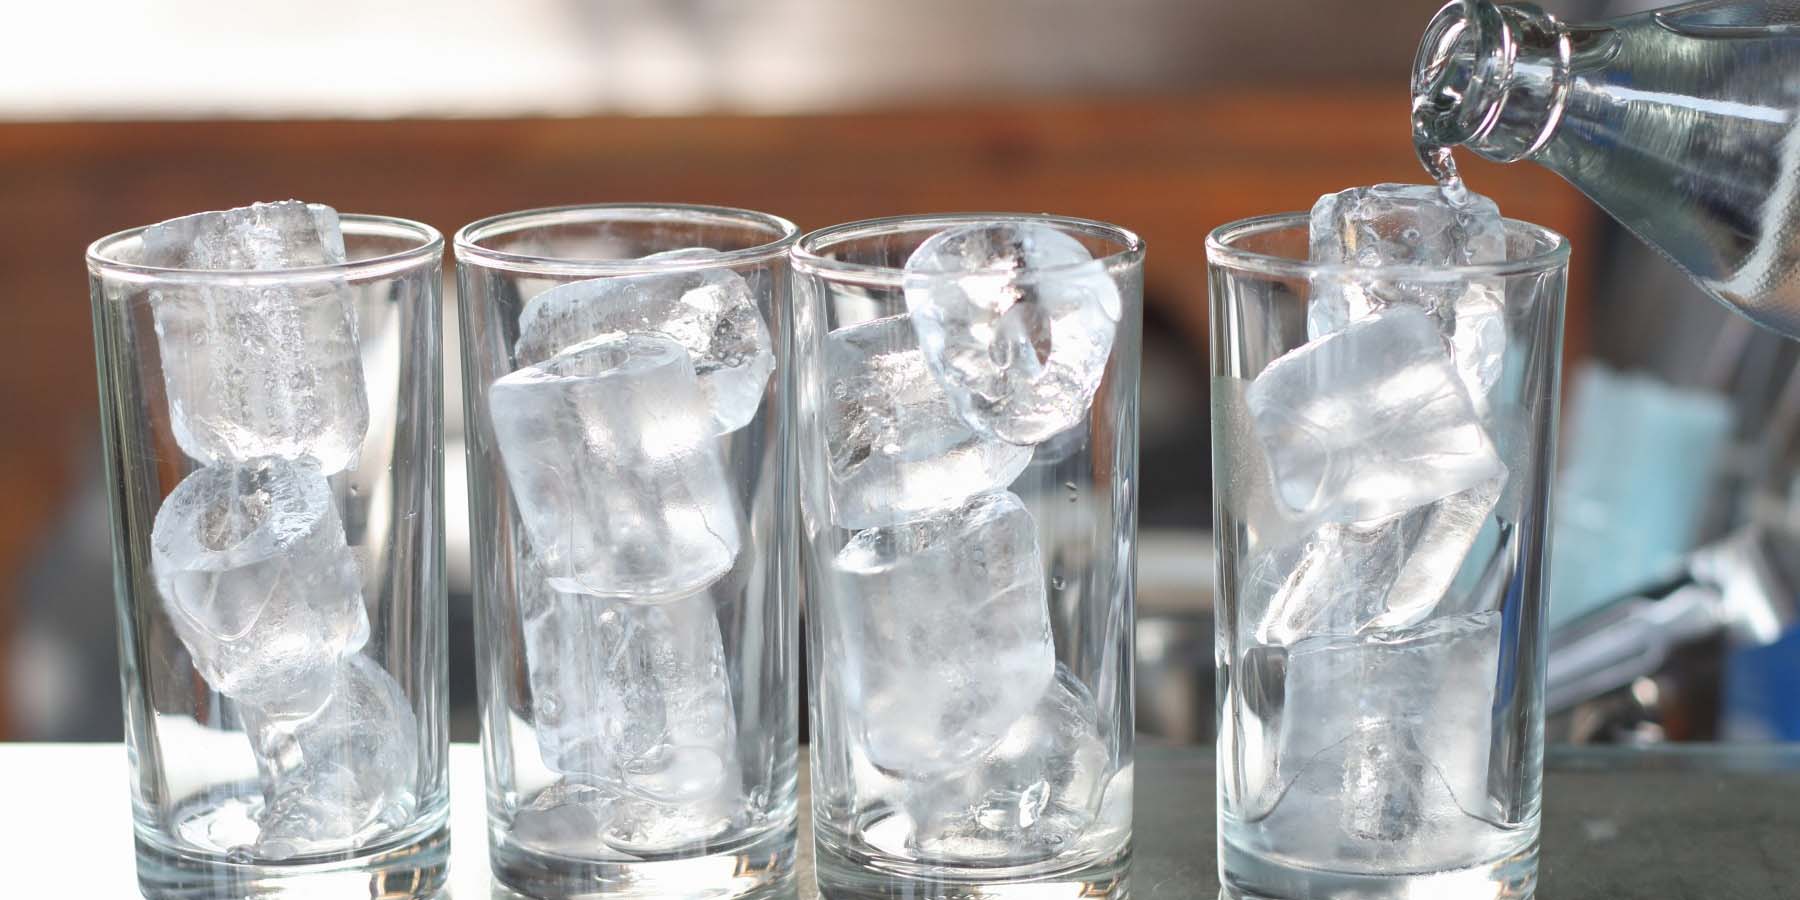 Photo of empty glass with ice cubes